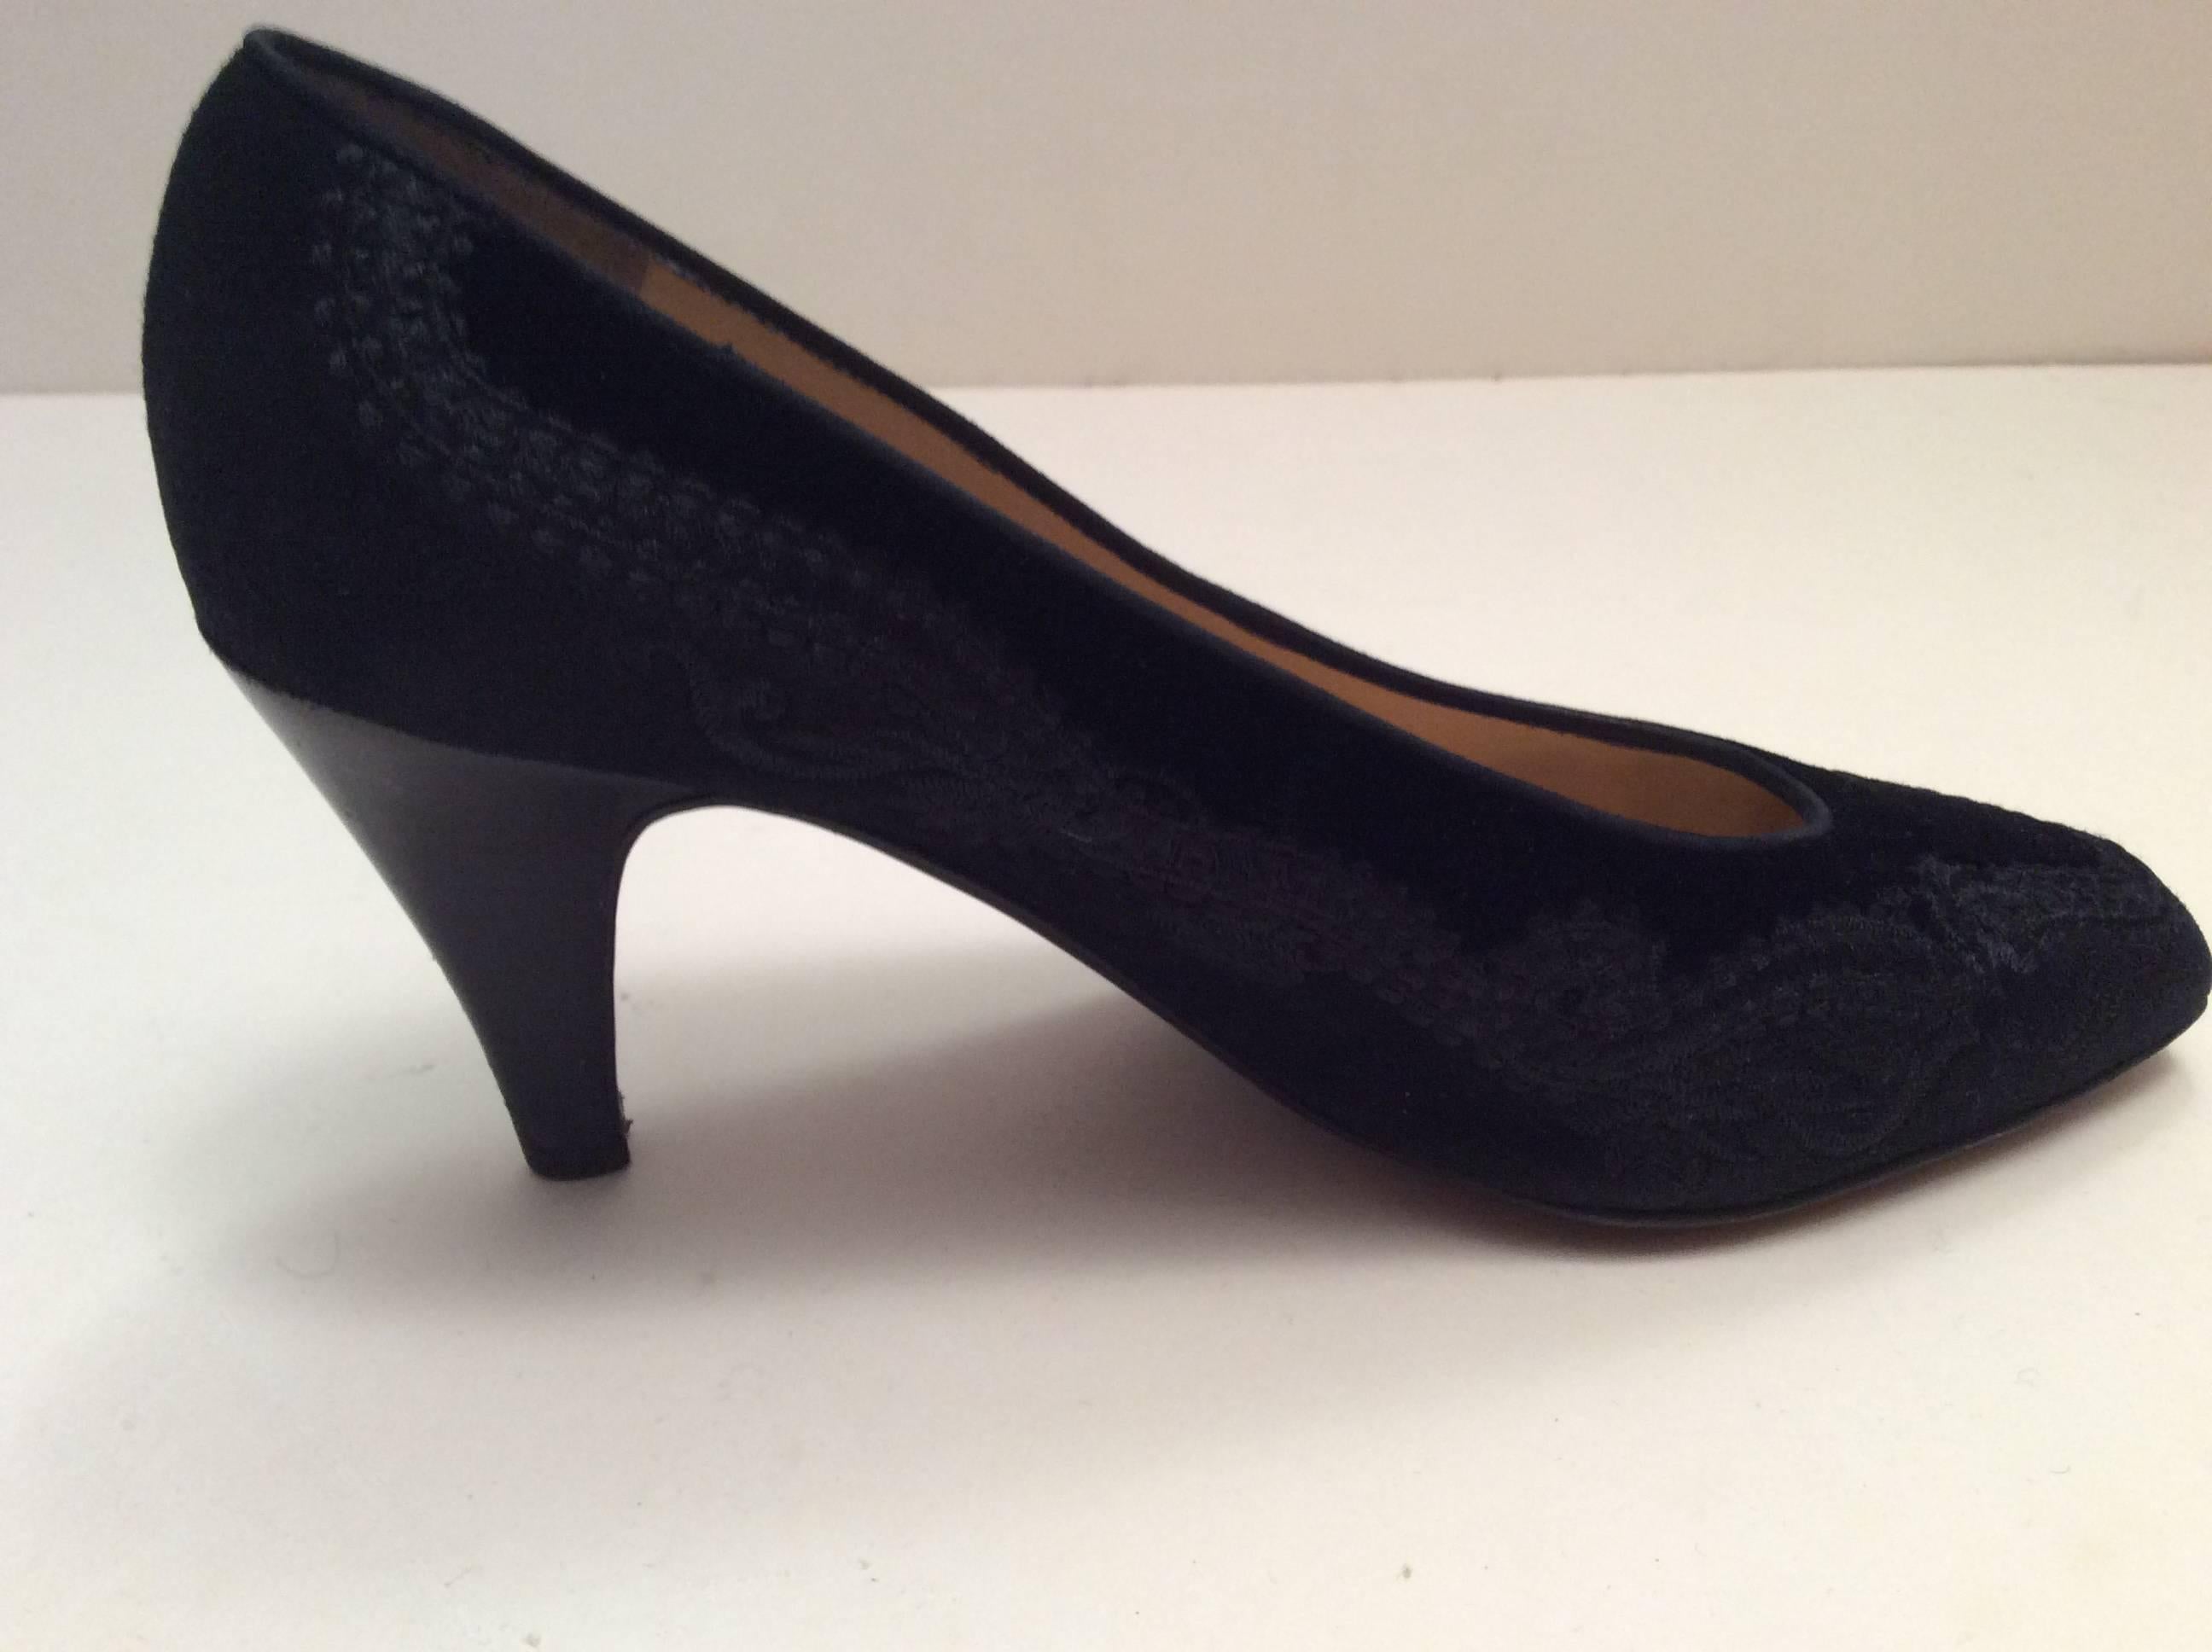 Here are a pair of Sergio Rossi black suede pumps with elaborate stitching embroidery throughout the suede of the shoe. They are beautifully articulated and make a significant statement no matter what situation you are in. They are size 37 and are